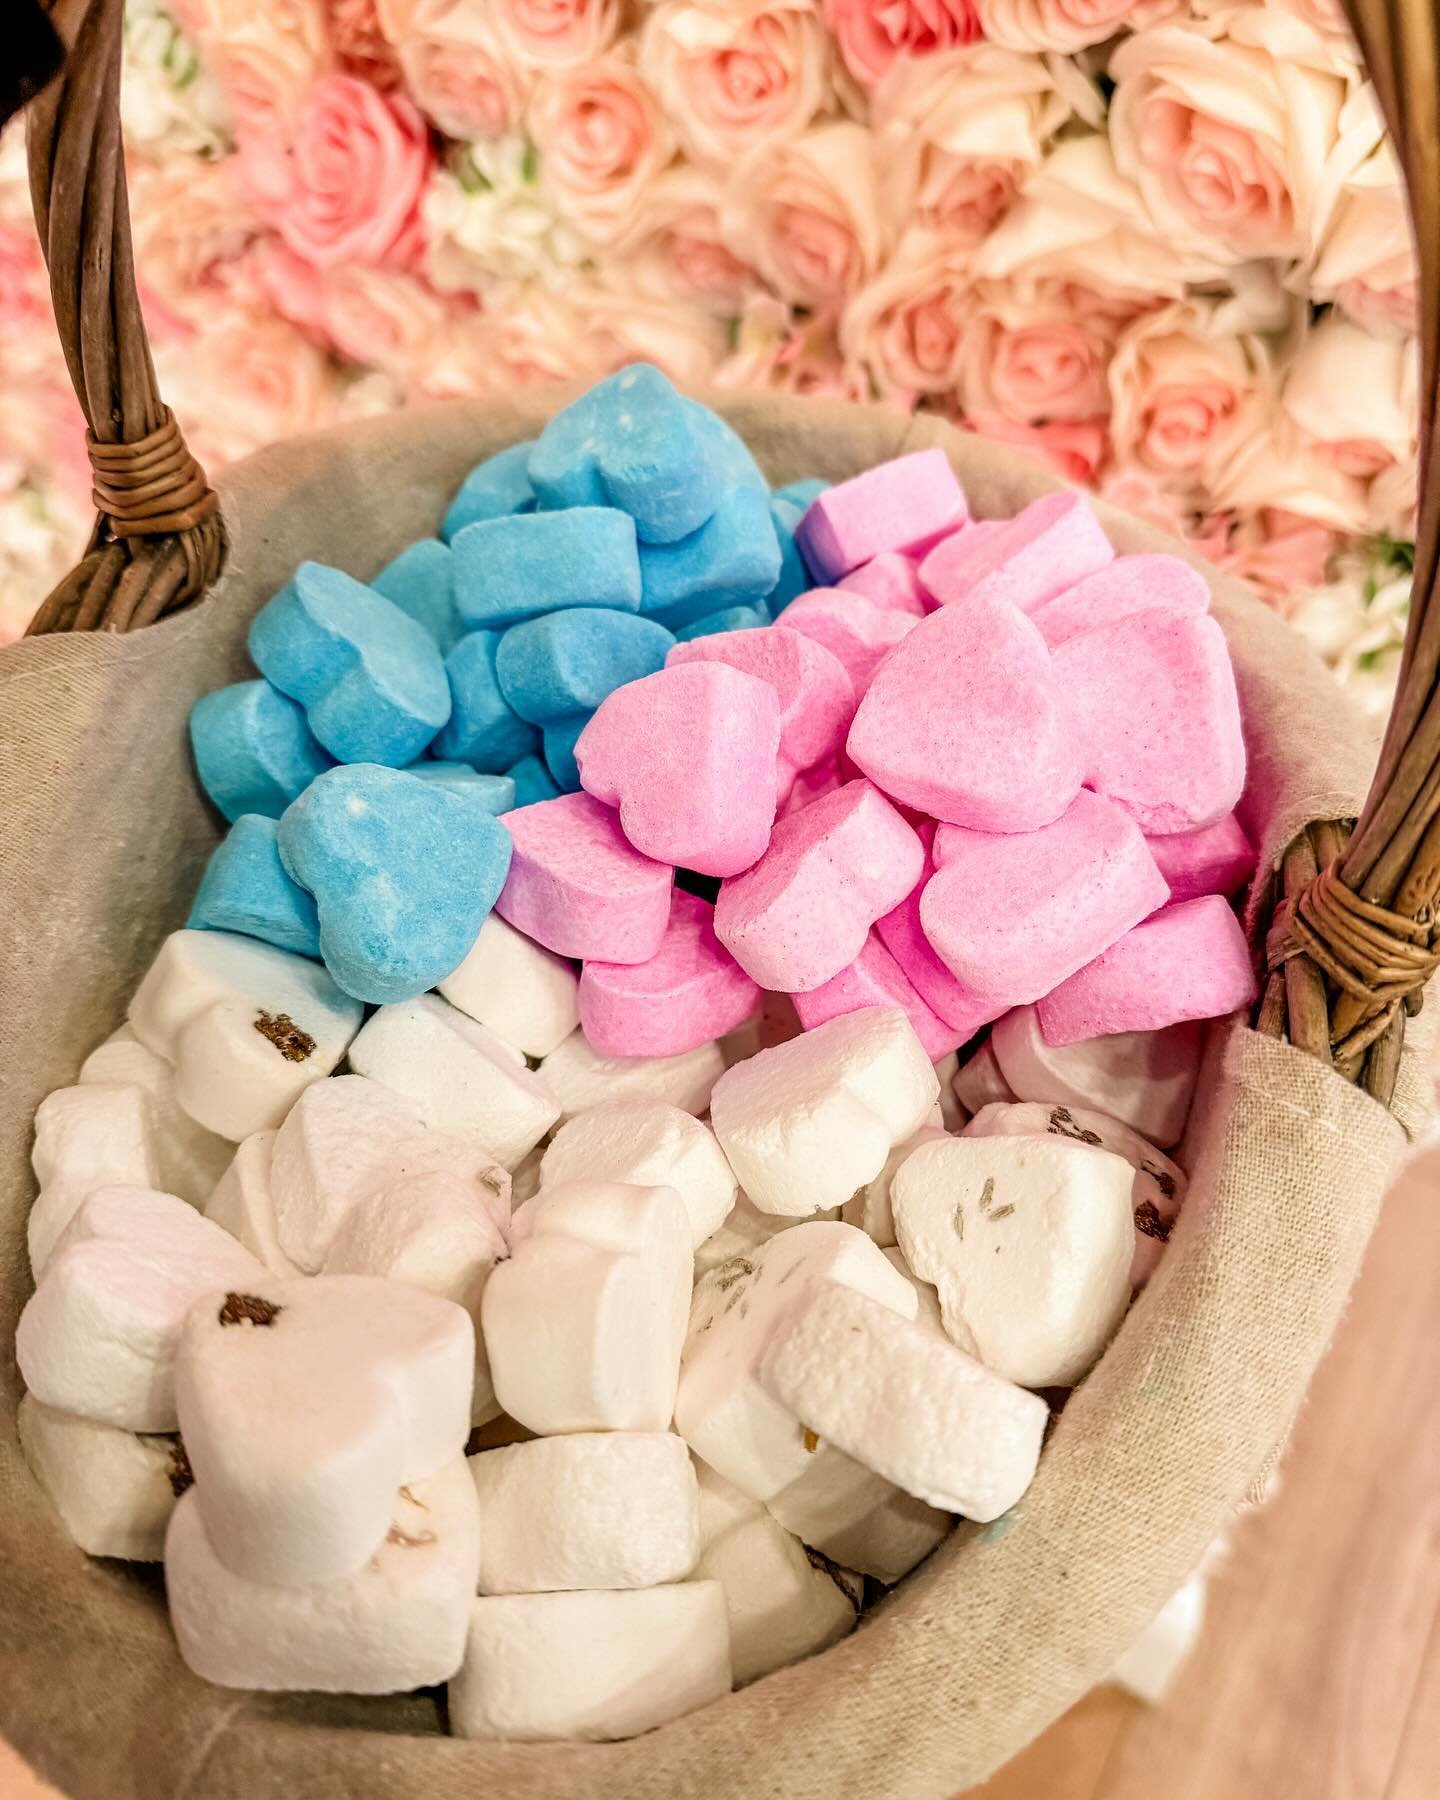 Our pink and blue mini heart bath bombs for our foot spas are back in stock! 🌟 Swipe to watch one fizz, they smell so good too and turn the water pink or blue 💞

#childrenssalon #childrensspa #kidsspa #footspa #kidsfootspa #heartbathbomb